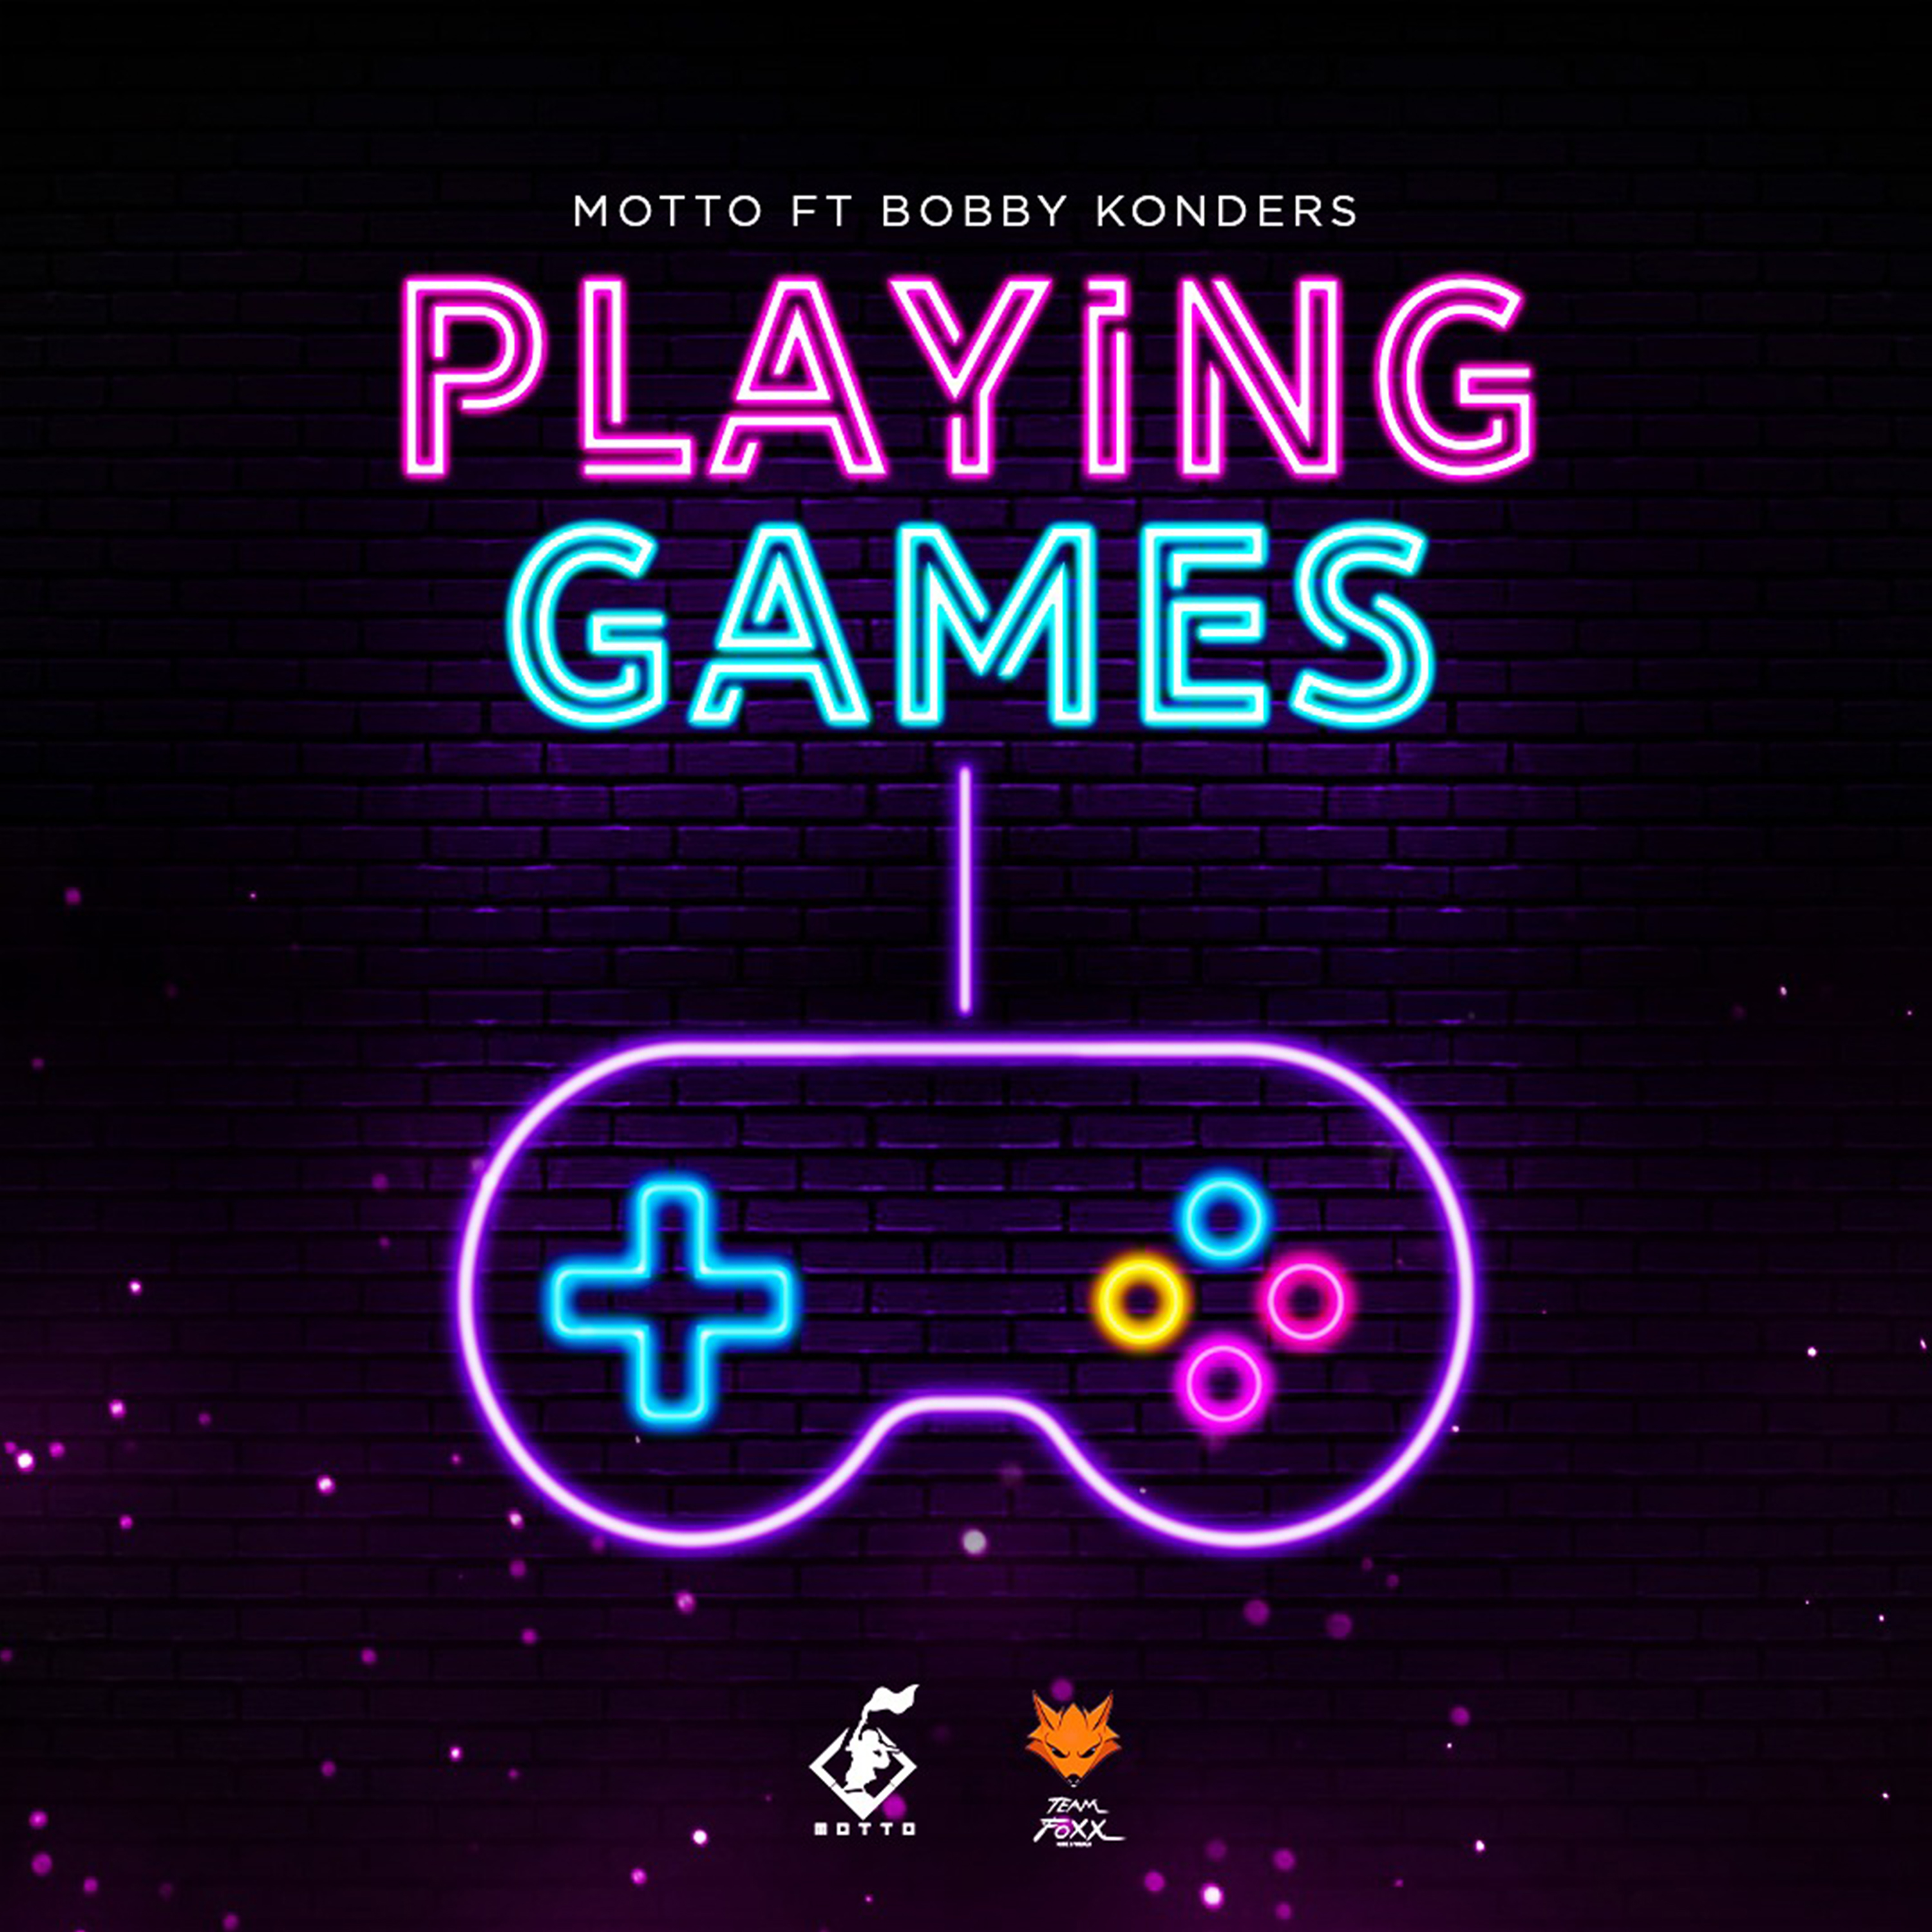 Art for Playing Games by Motto